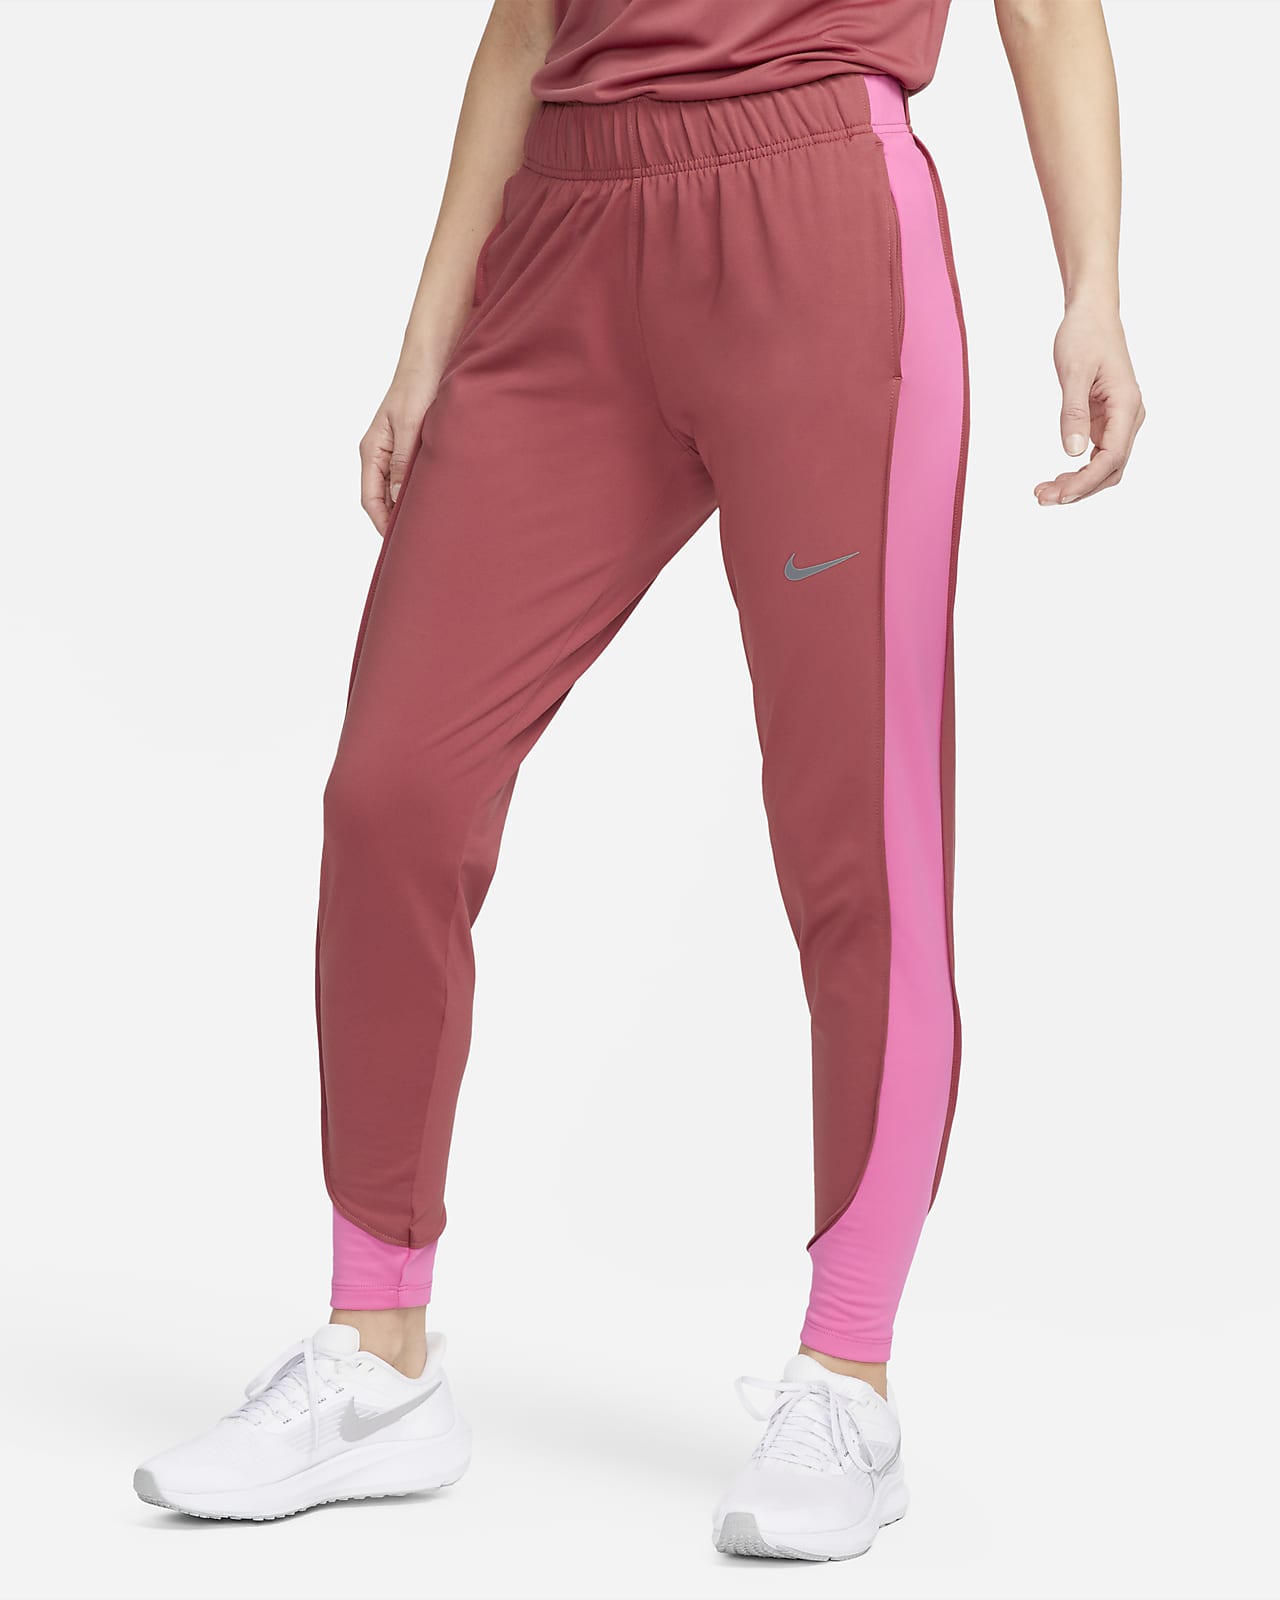 Therma-FIT Essential Women's Running Pants.